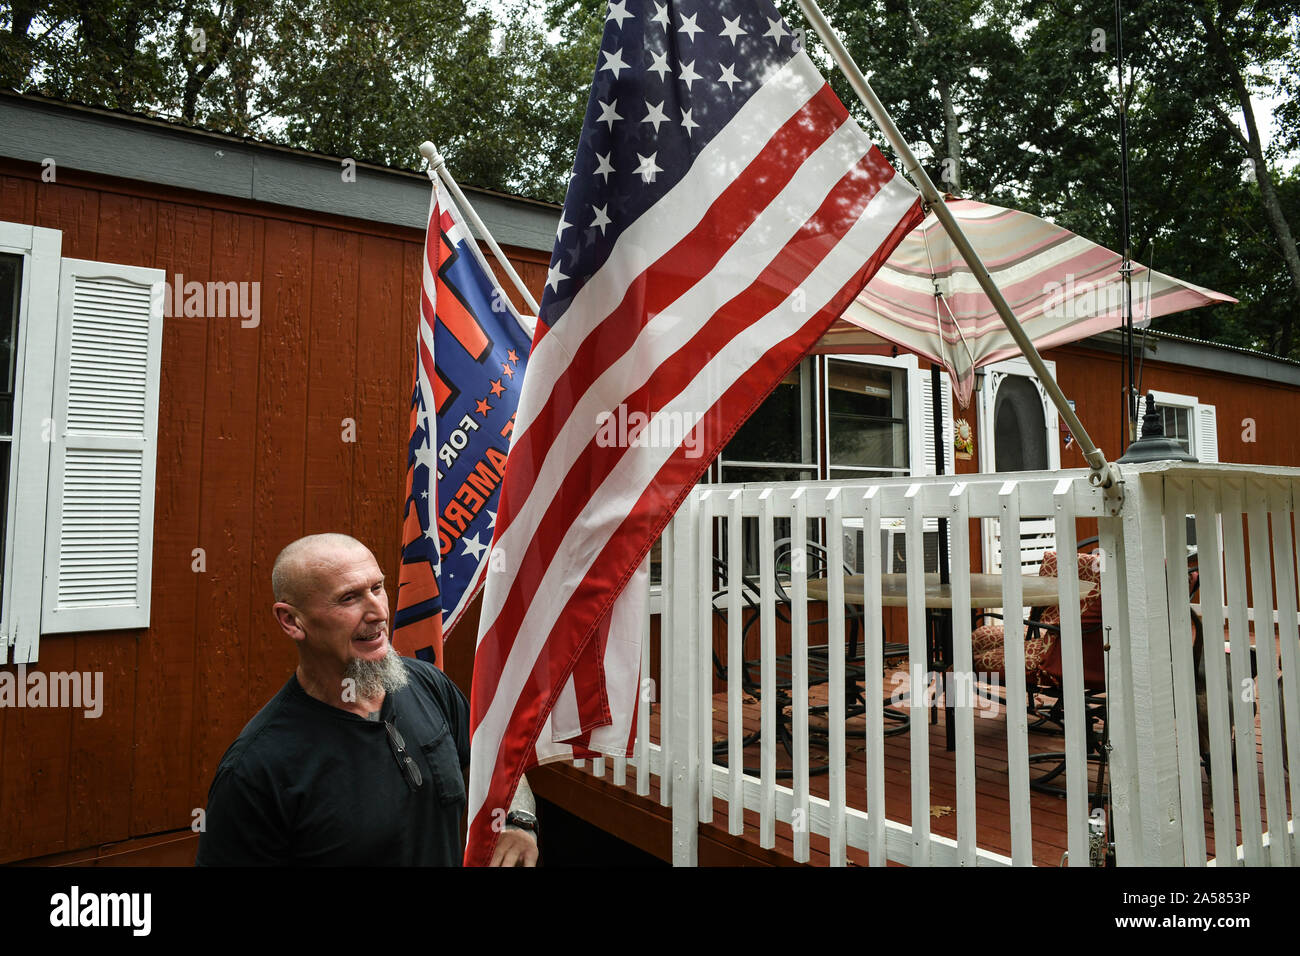 Dahlonega, Georgia, USA. 18th Sep, 2019. Outside his house, Doles flies the American flag and a Trump flag. Doles said that to him, America means 'the continuation of Western civilization, a way of life, to be patriotic, to hang on to our institutions as they had been''¦ and since we were from old Europe, to hang on to marriage between a man and a woman, to the idea that life starts in conception. These are the things that are the very fabric of western civilization, and the world as we know it, and in the horizon is a growing trend of liberalism, socialism, that will''¦destroy our very w Stock Photo